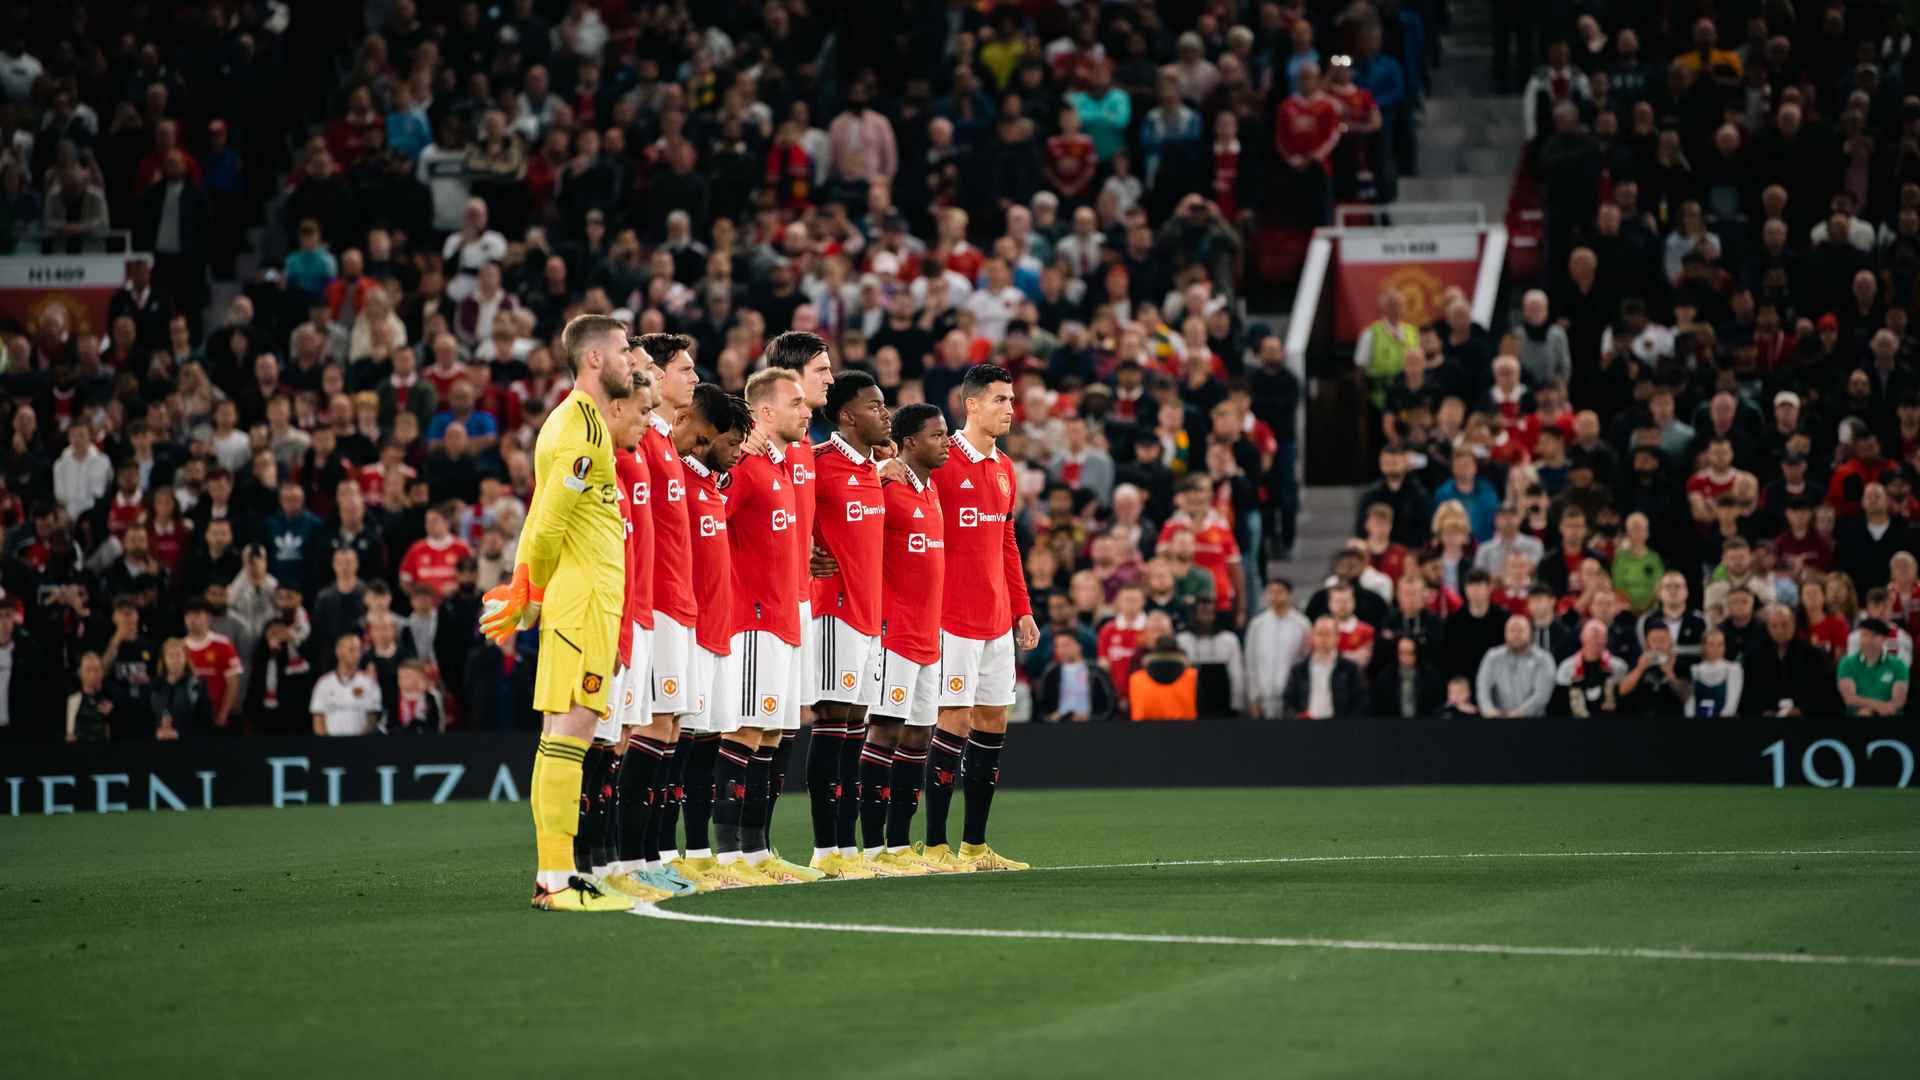 Old Trafford will be closed on Monday 19 September as Man Utd pay respects to Queen Elizabeth II